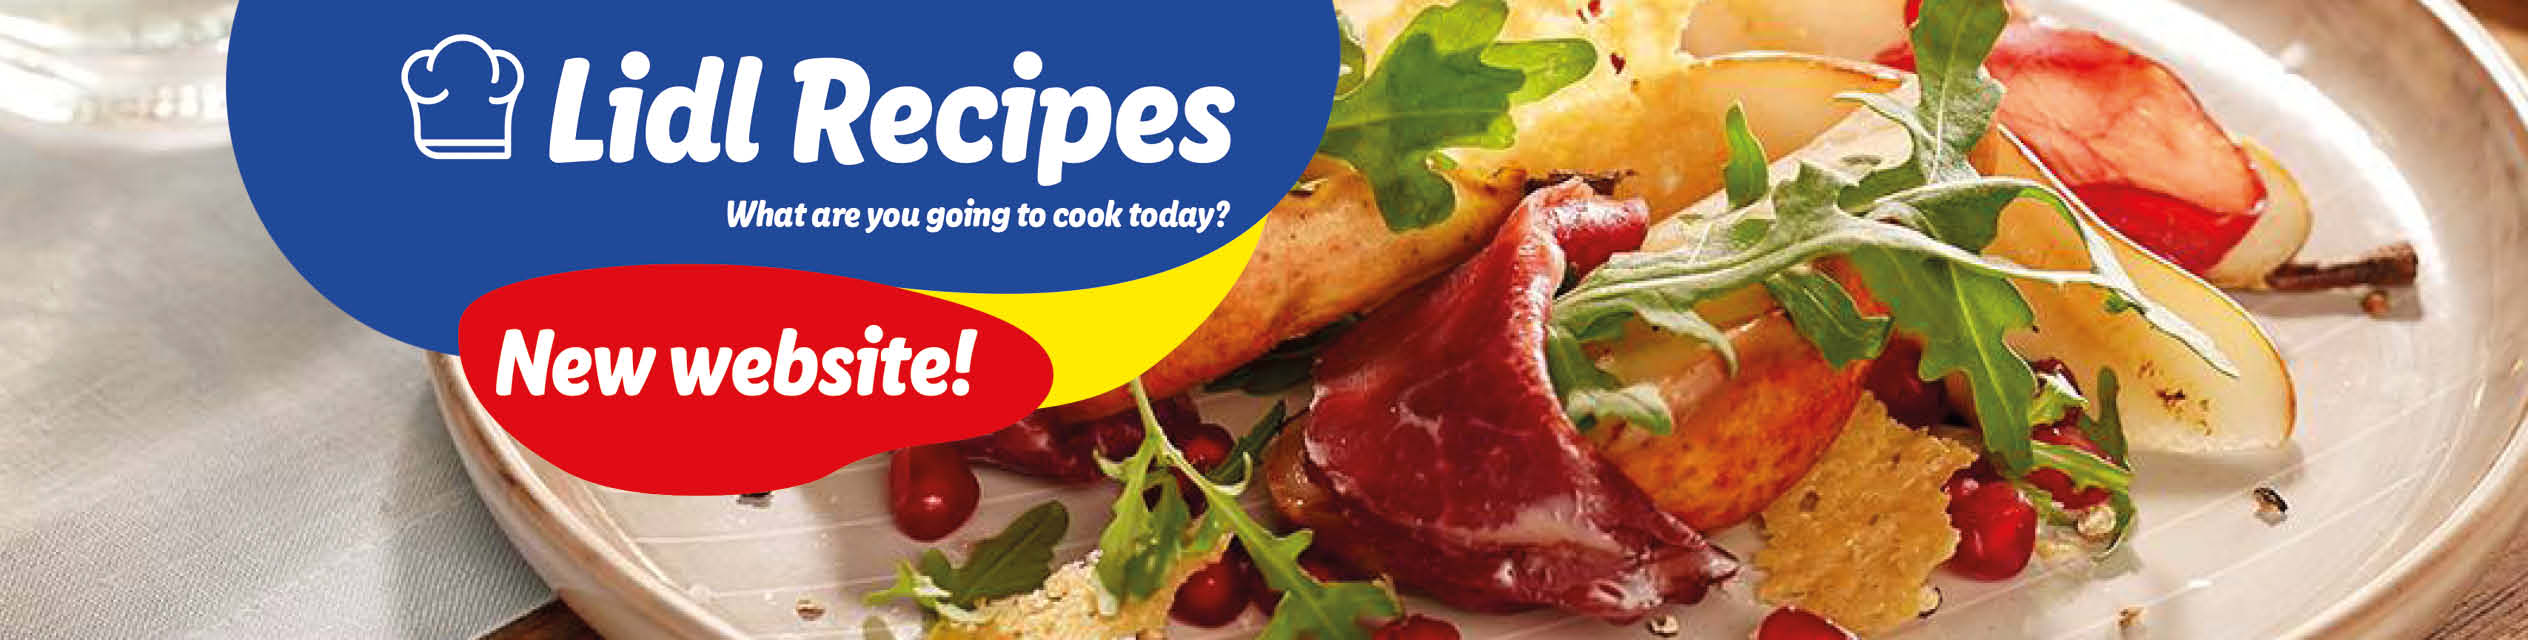 Lidl Recipes - Get inspired!